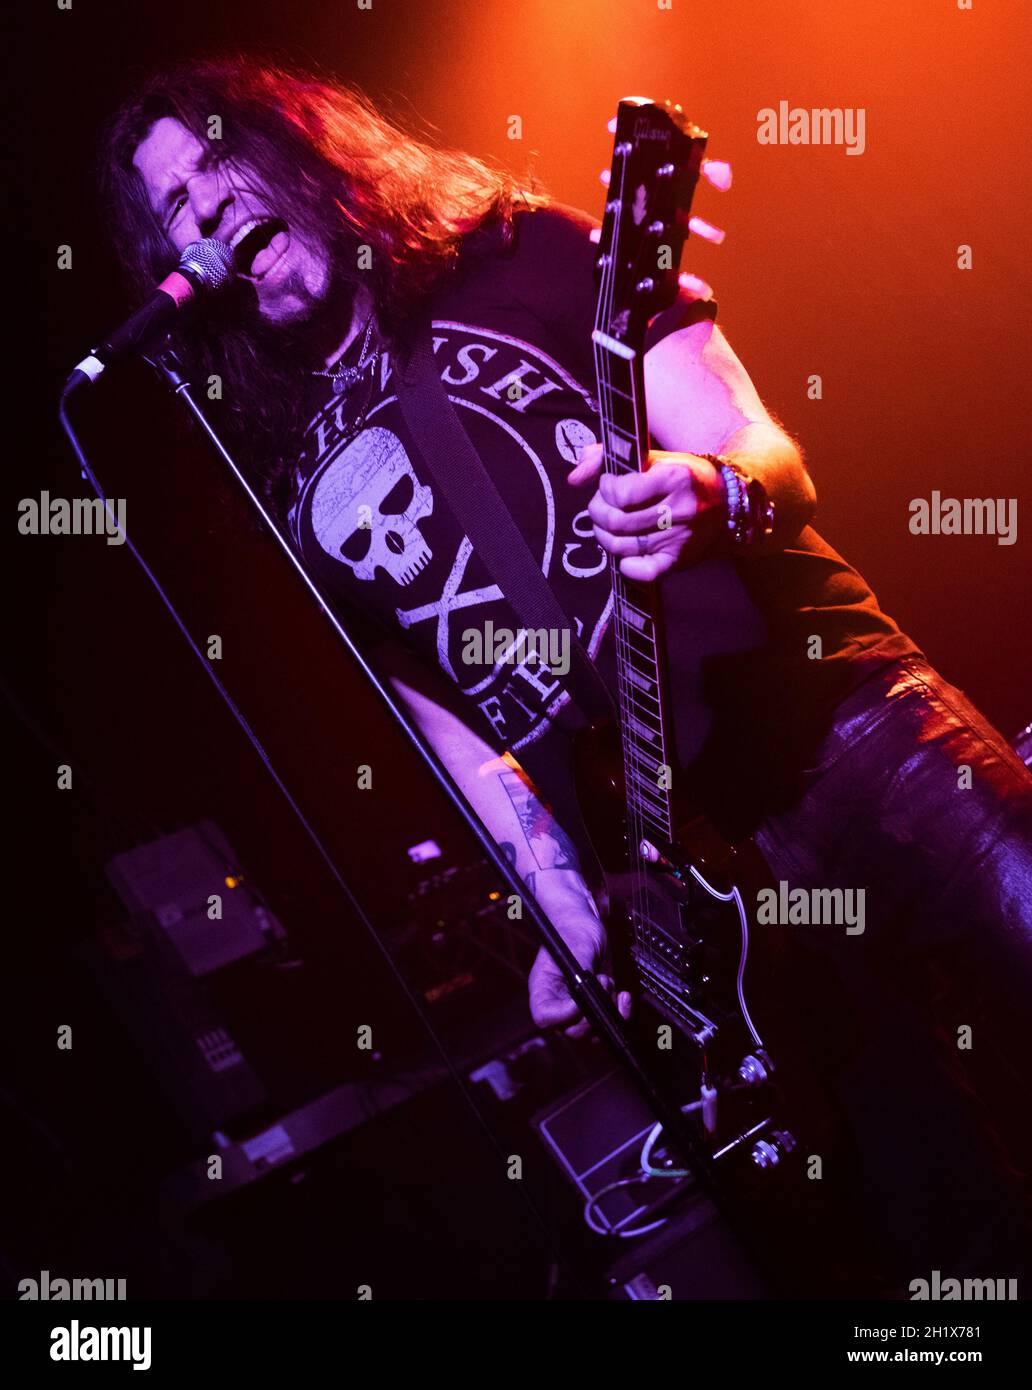 Phil X & The Drills live in concert at Birmingham O2 Academy 3, UK, March 12th, 2020. Live music photography. Stock Photo